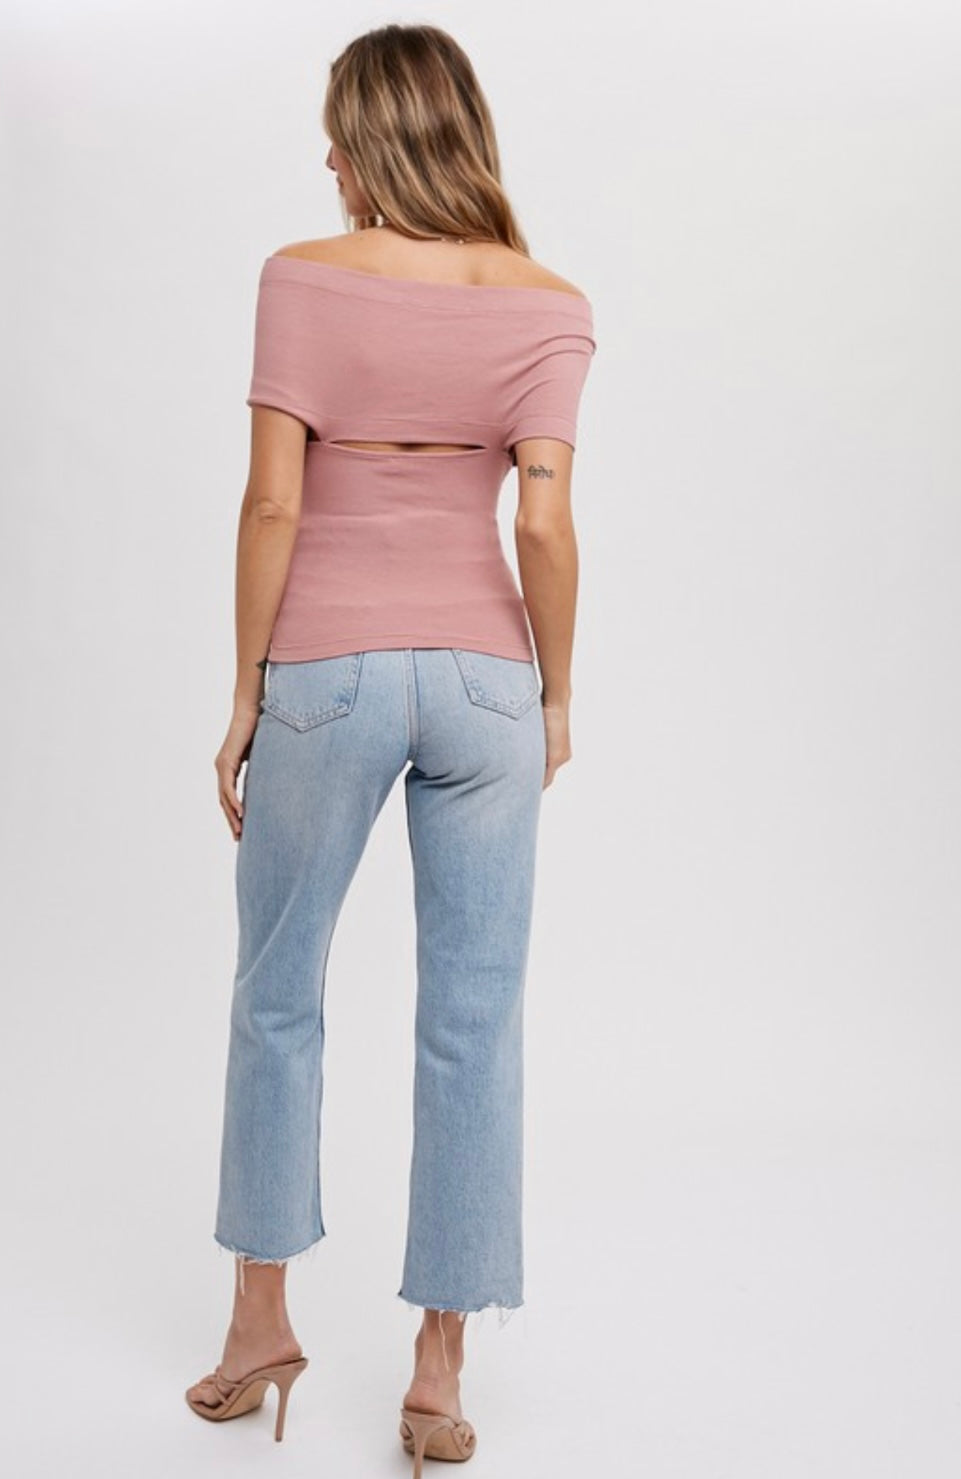 Crossing Paths Dusty Pink Off Shoulder Top